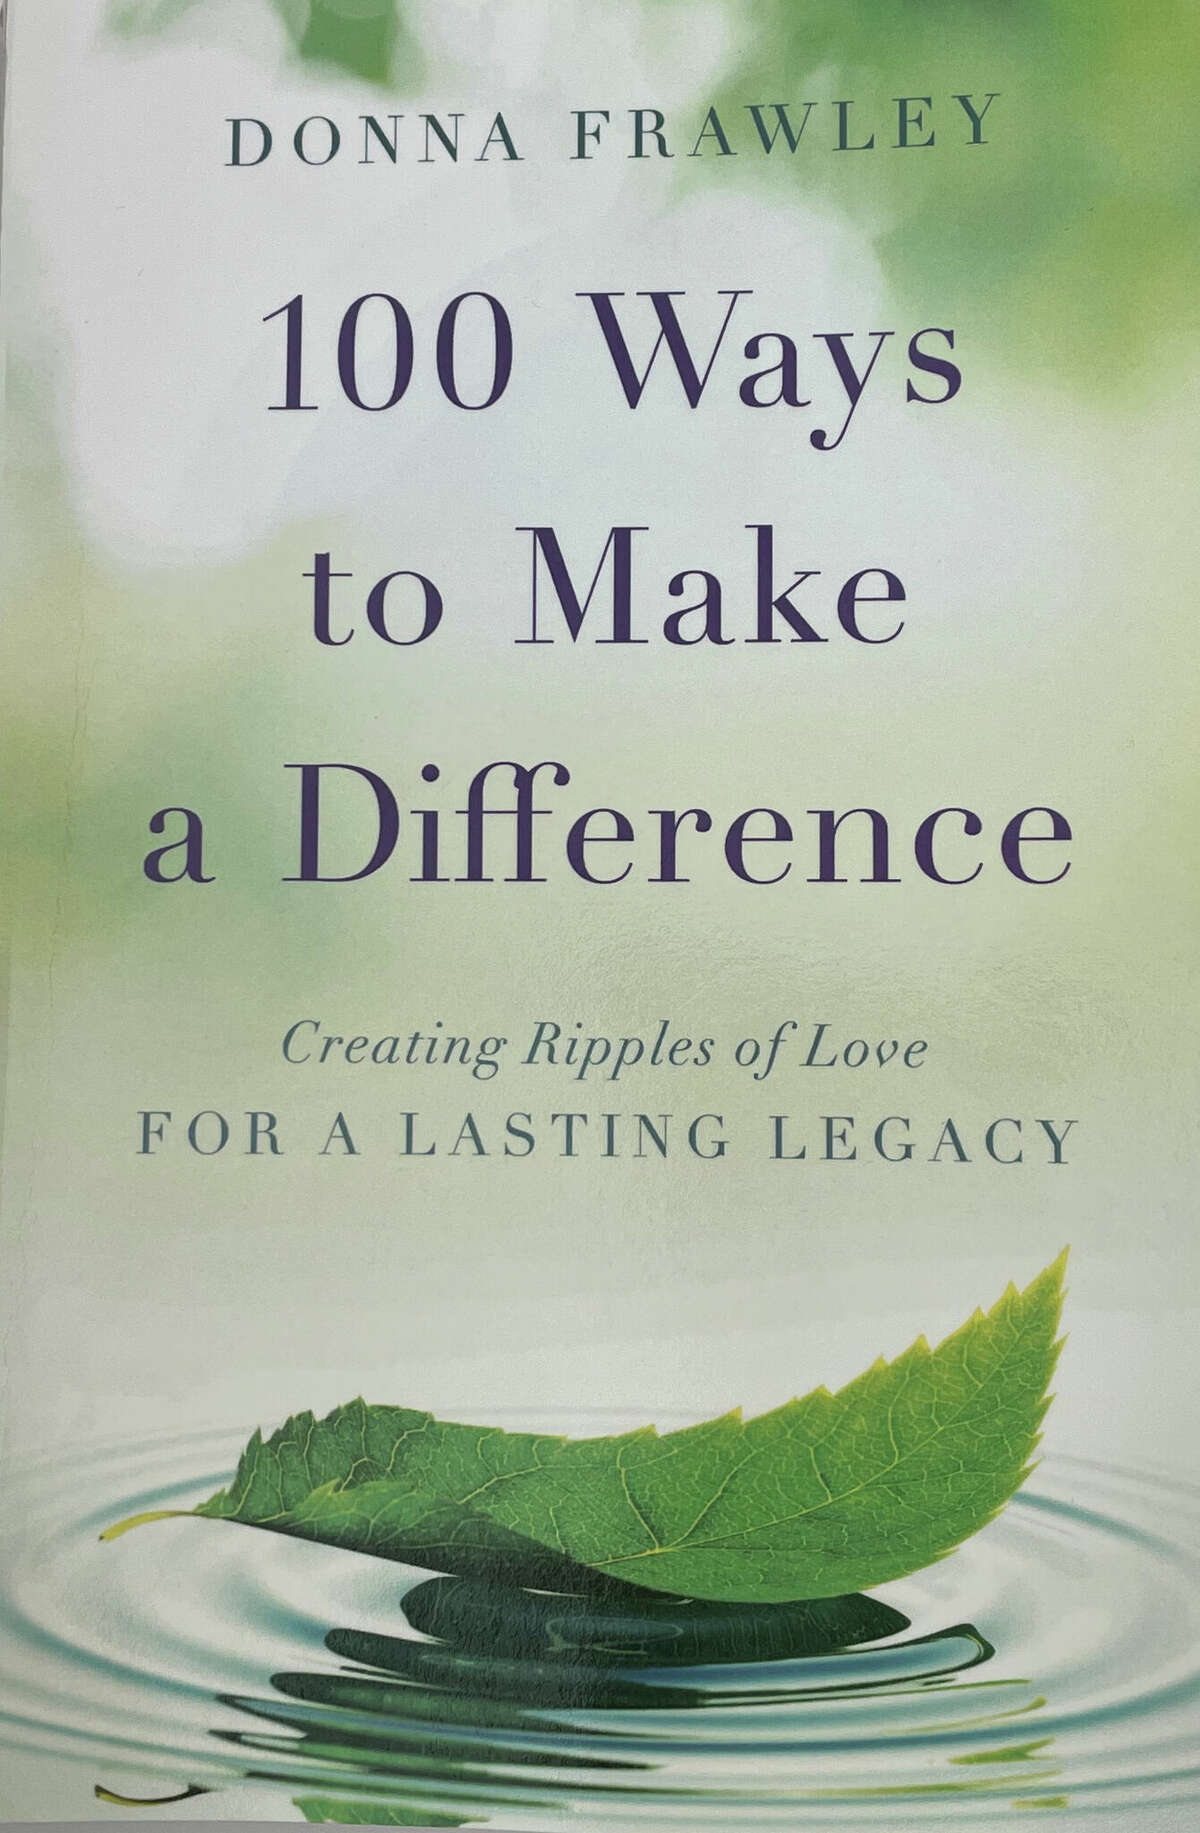 Donna Frawley's book, "100 Ways to Make a Difference – Creating Ripples of Love for a Lasting Legacy", is available for purchase at donnafrawley.com/, or at a book signing event from 2-5 p.m. on Saturday, Aug. 13 at 4613 Lund Drive in Midland.